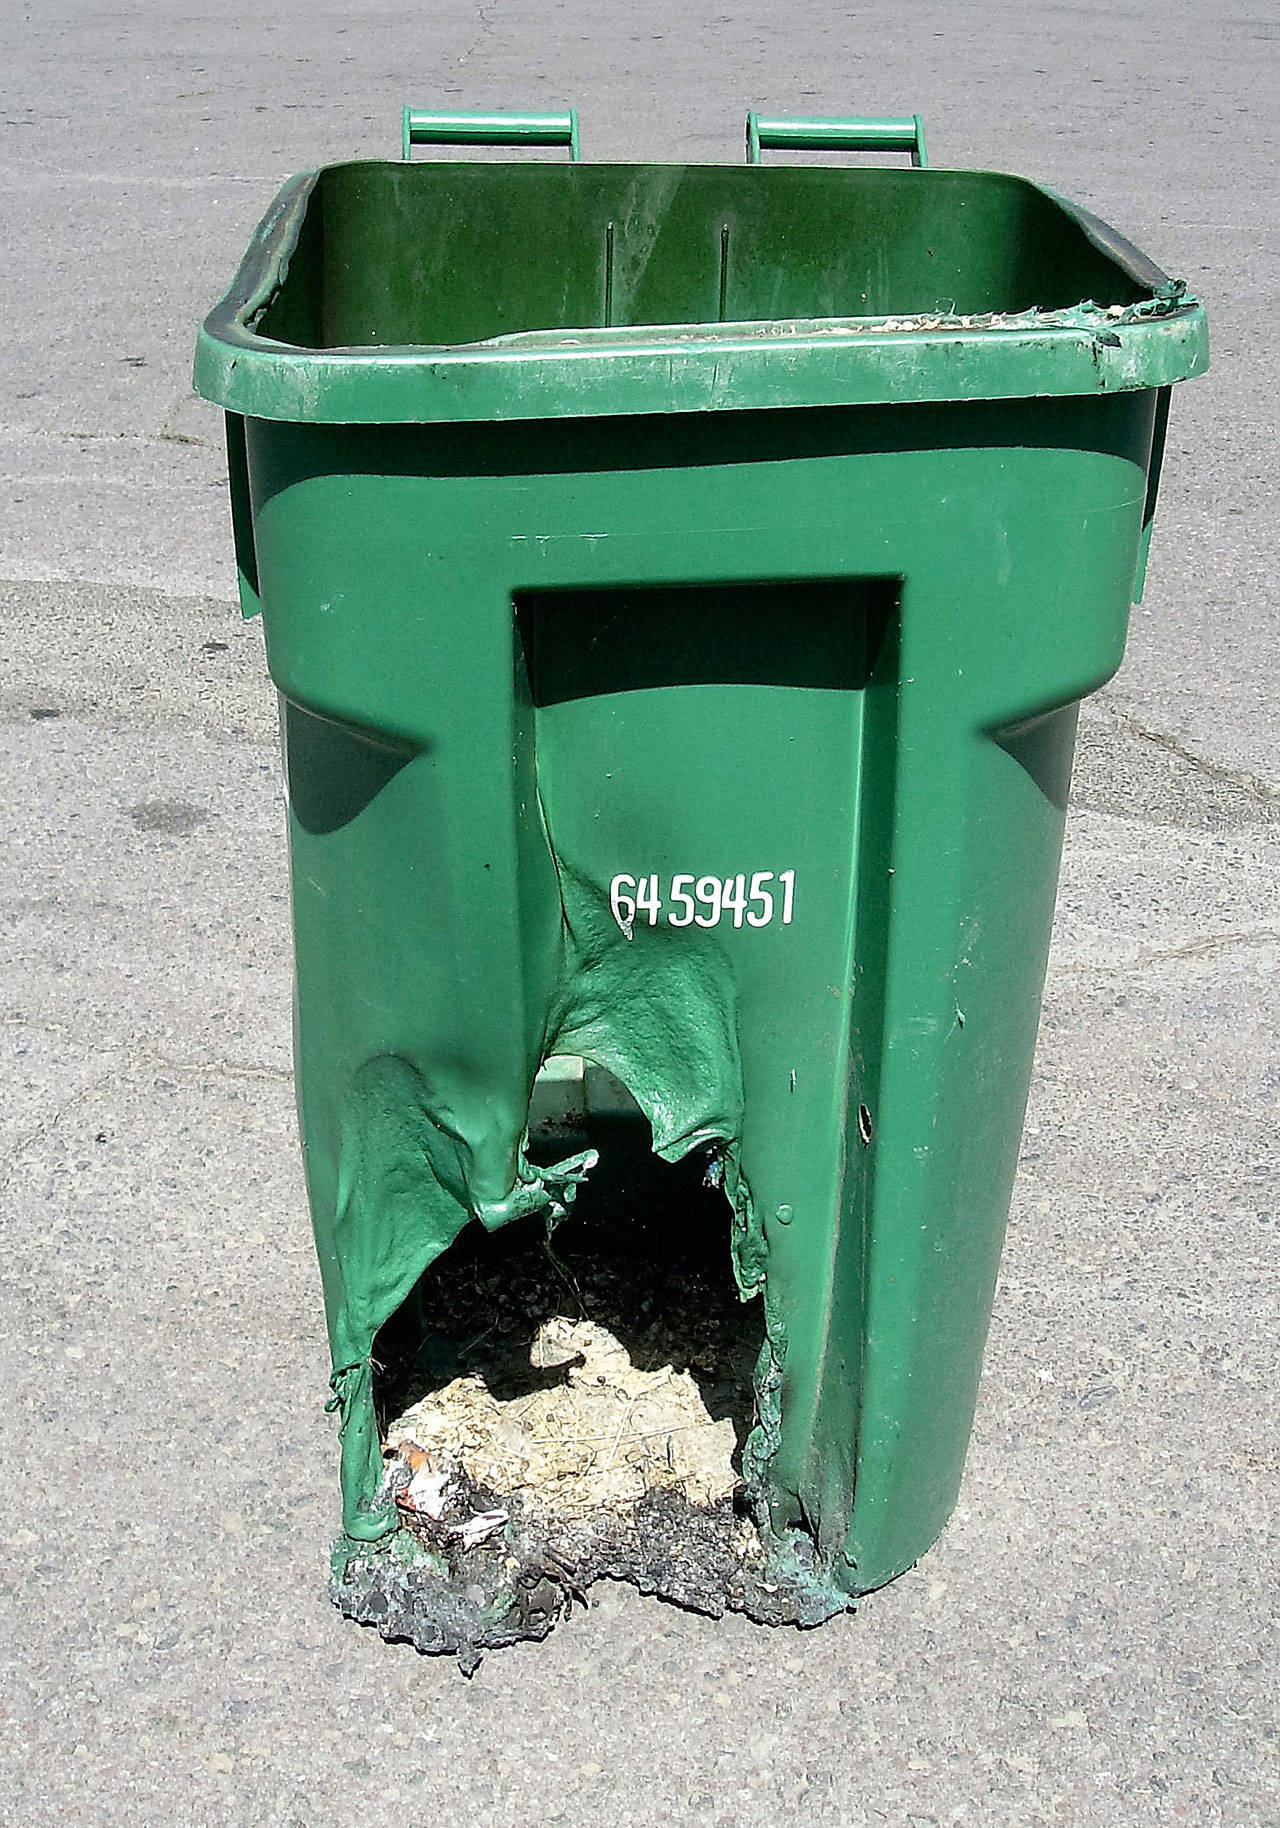 Never put coals or ashes in recycling or yard debris containers. COURTESY PHOTO, WM